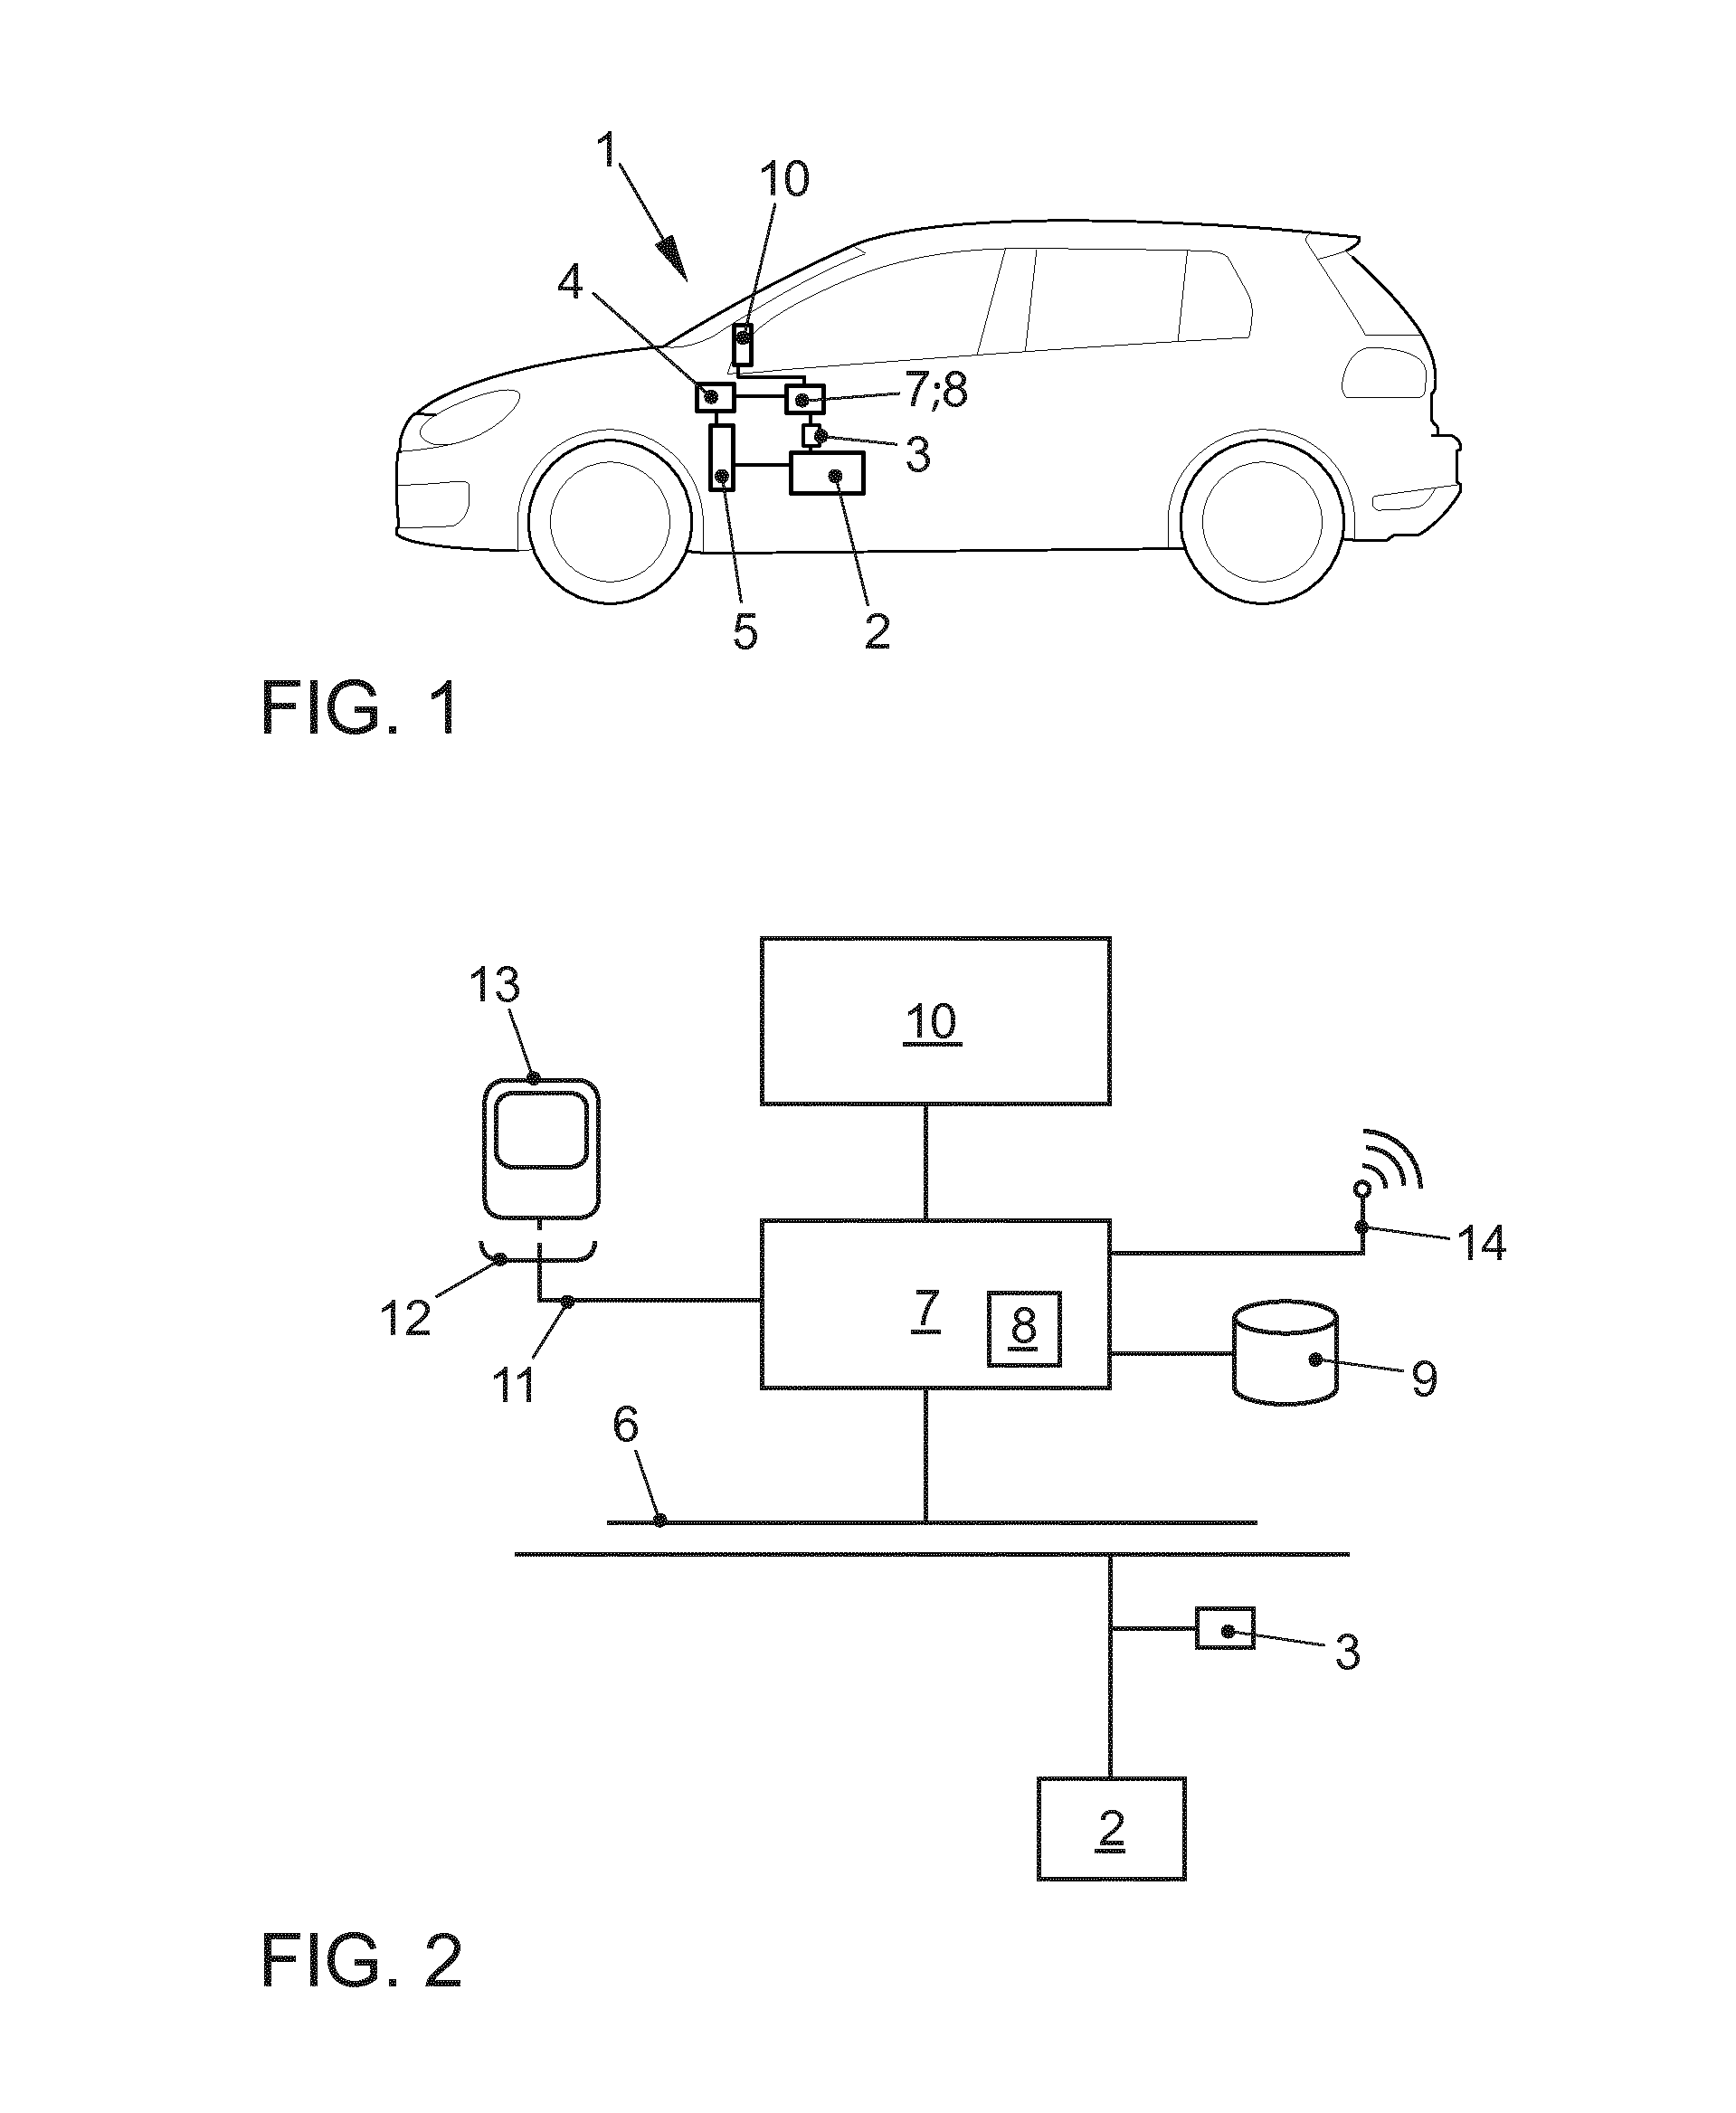 Method and device for providing an electronic appointment scheduler for a vehicle